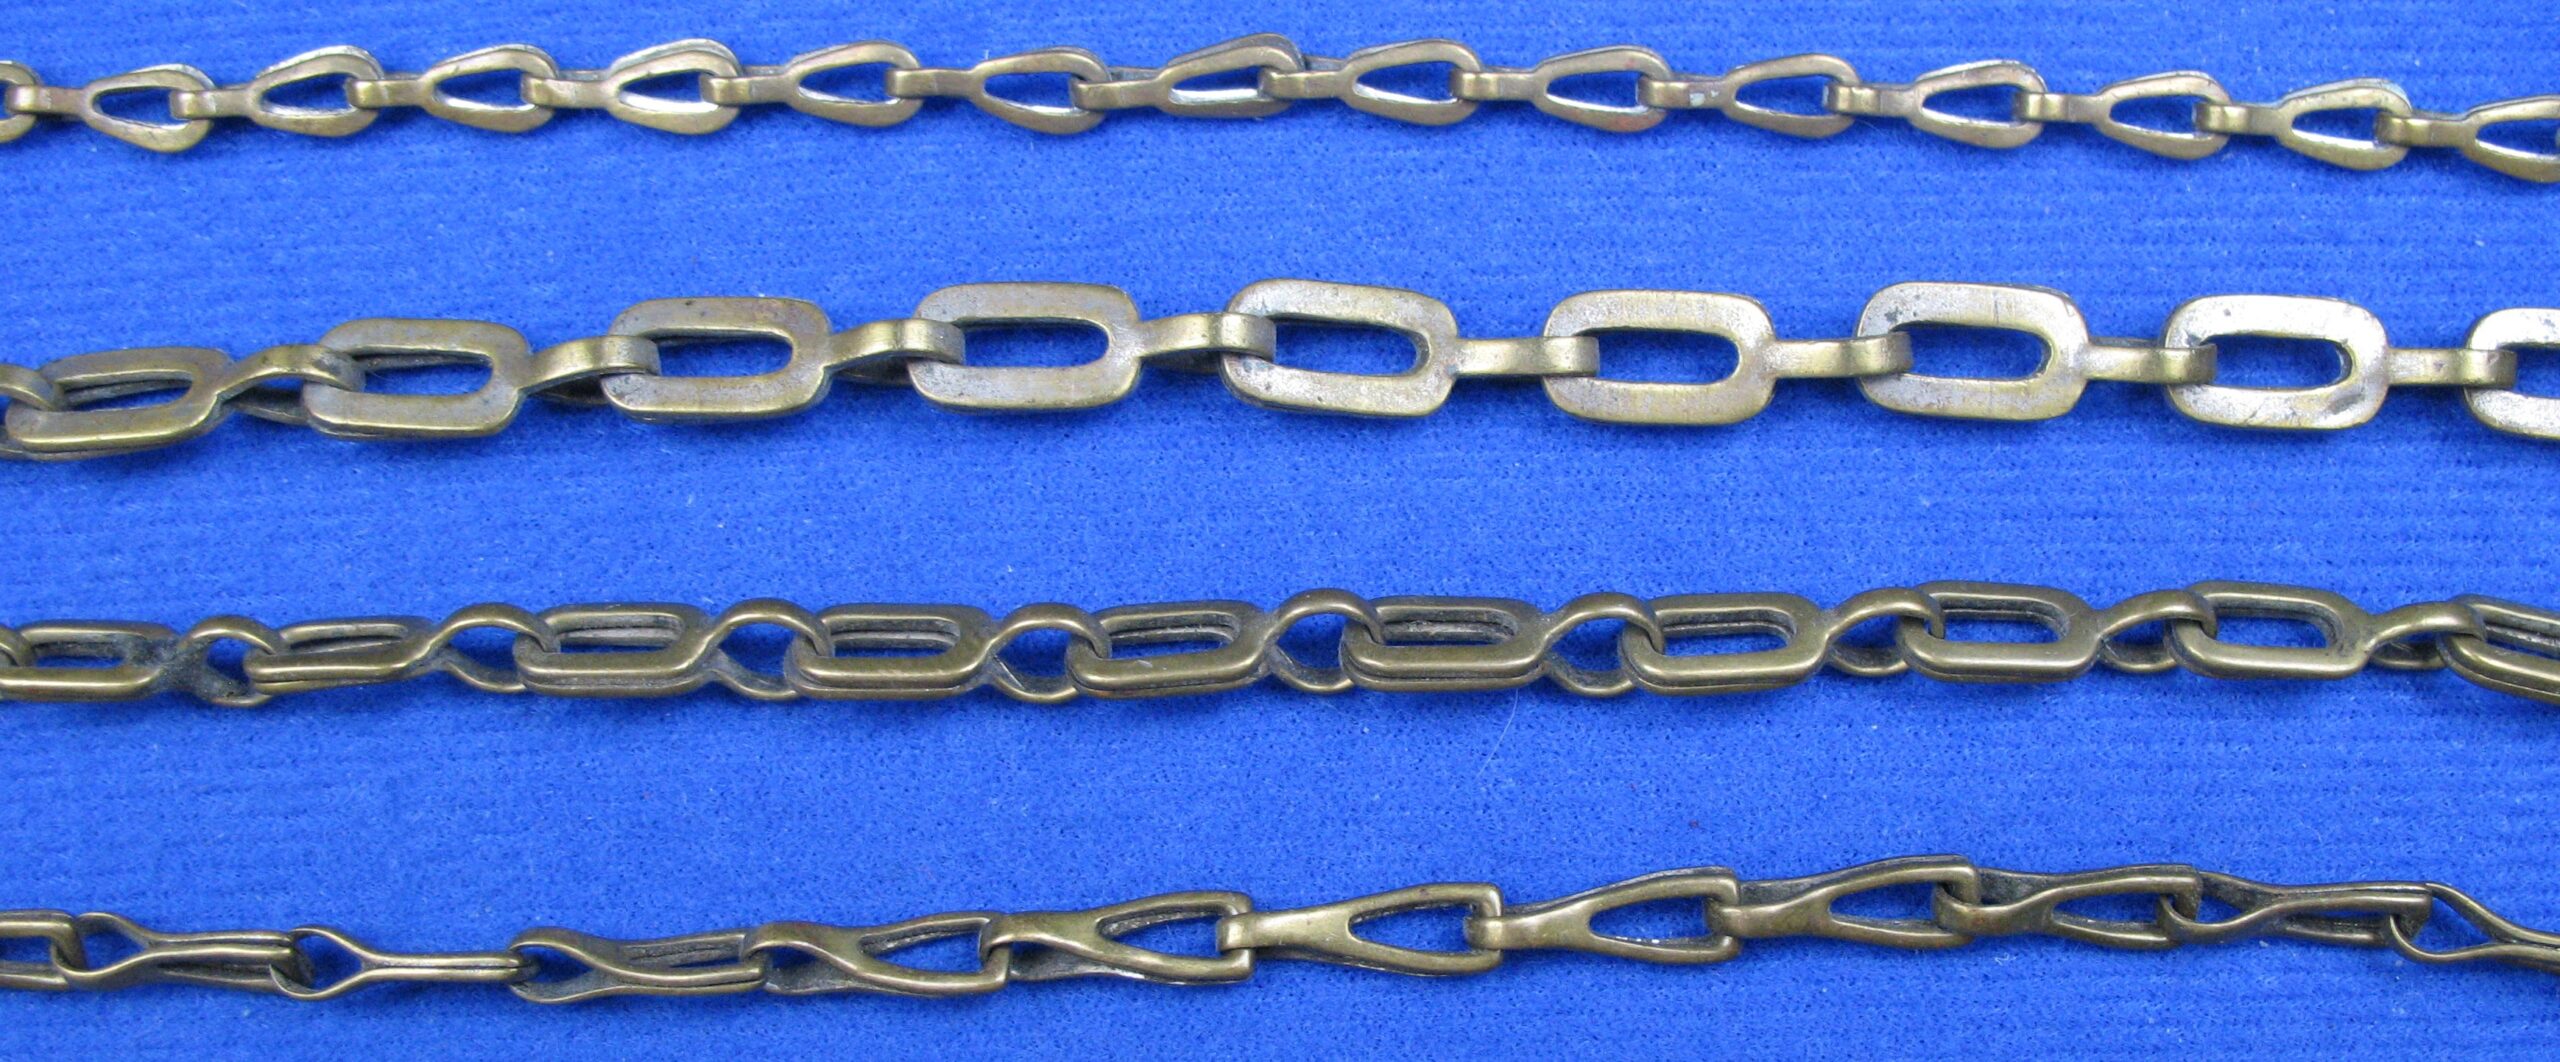 whistle chains